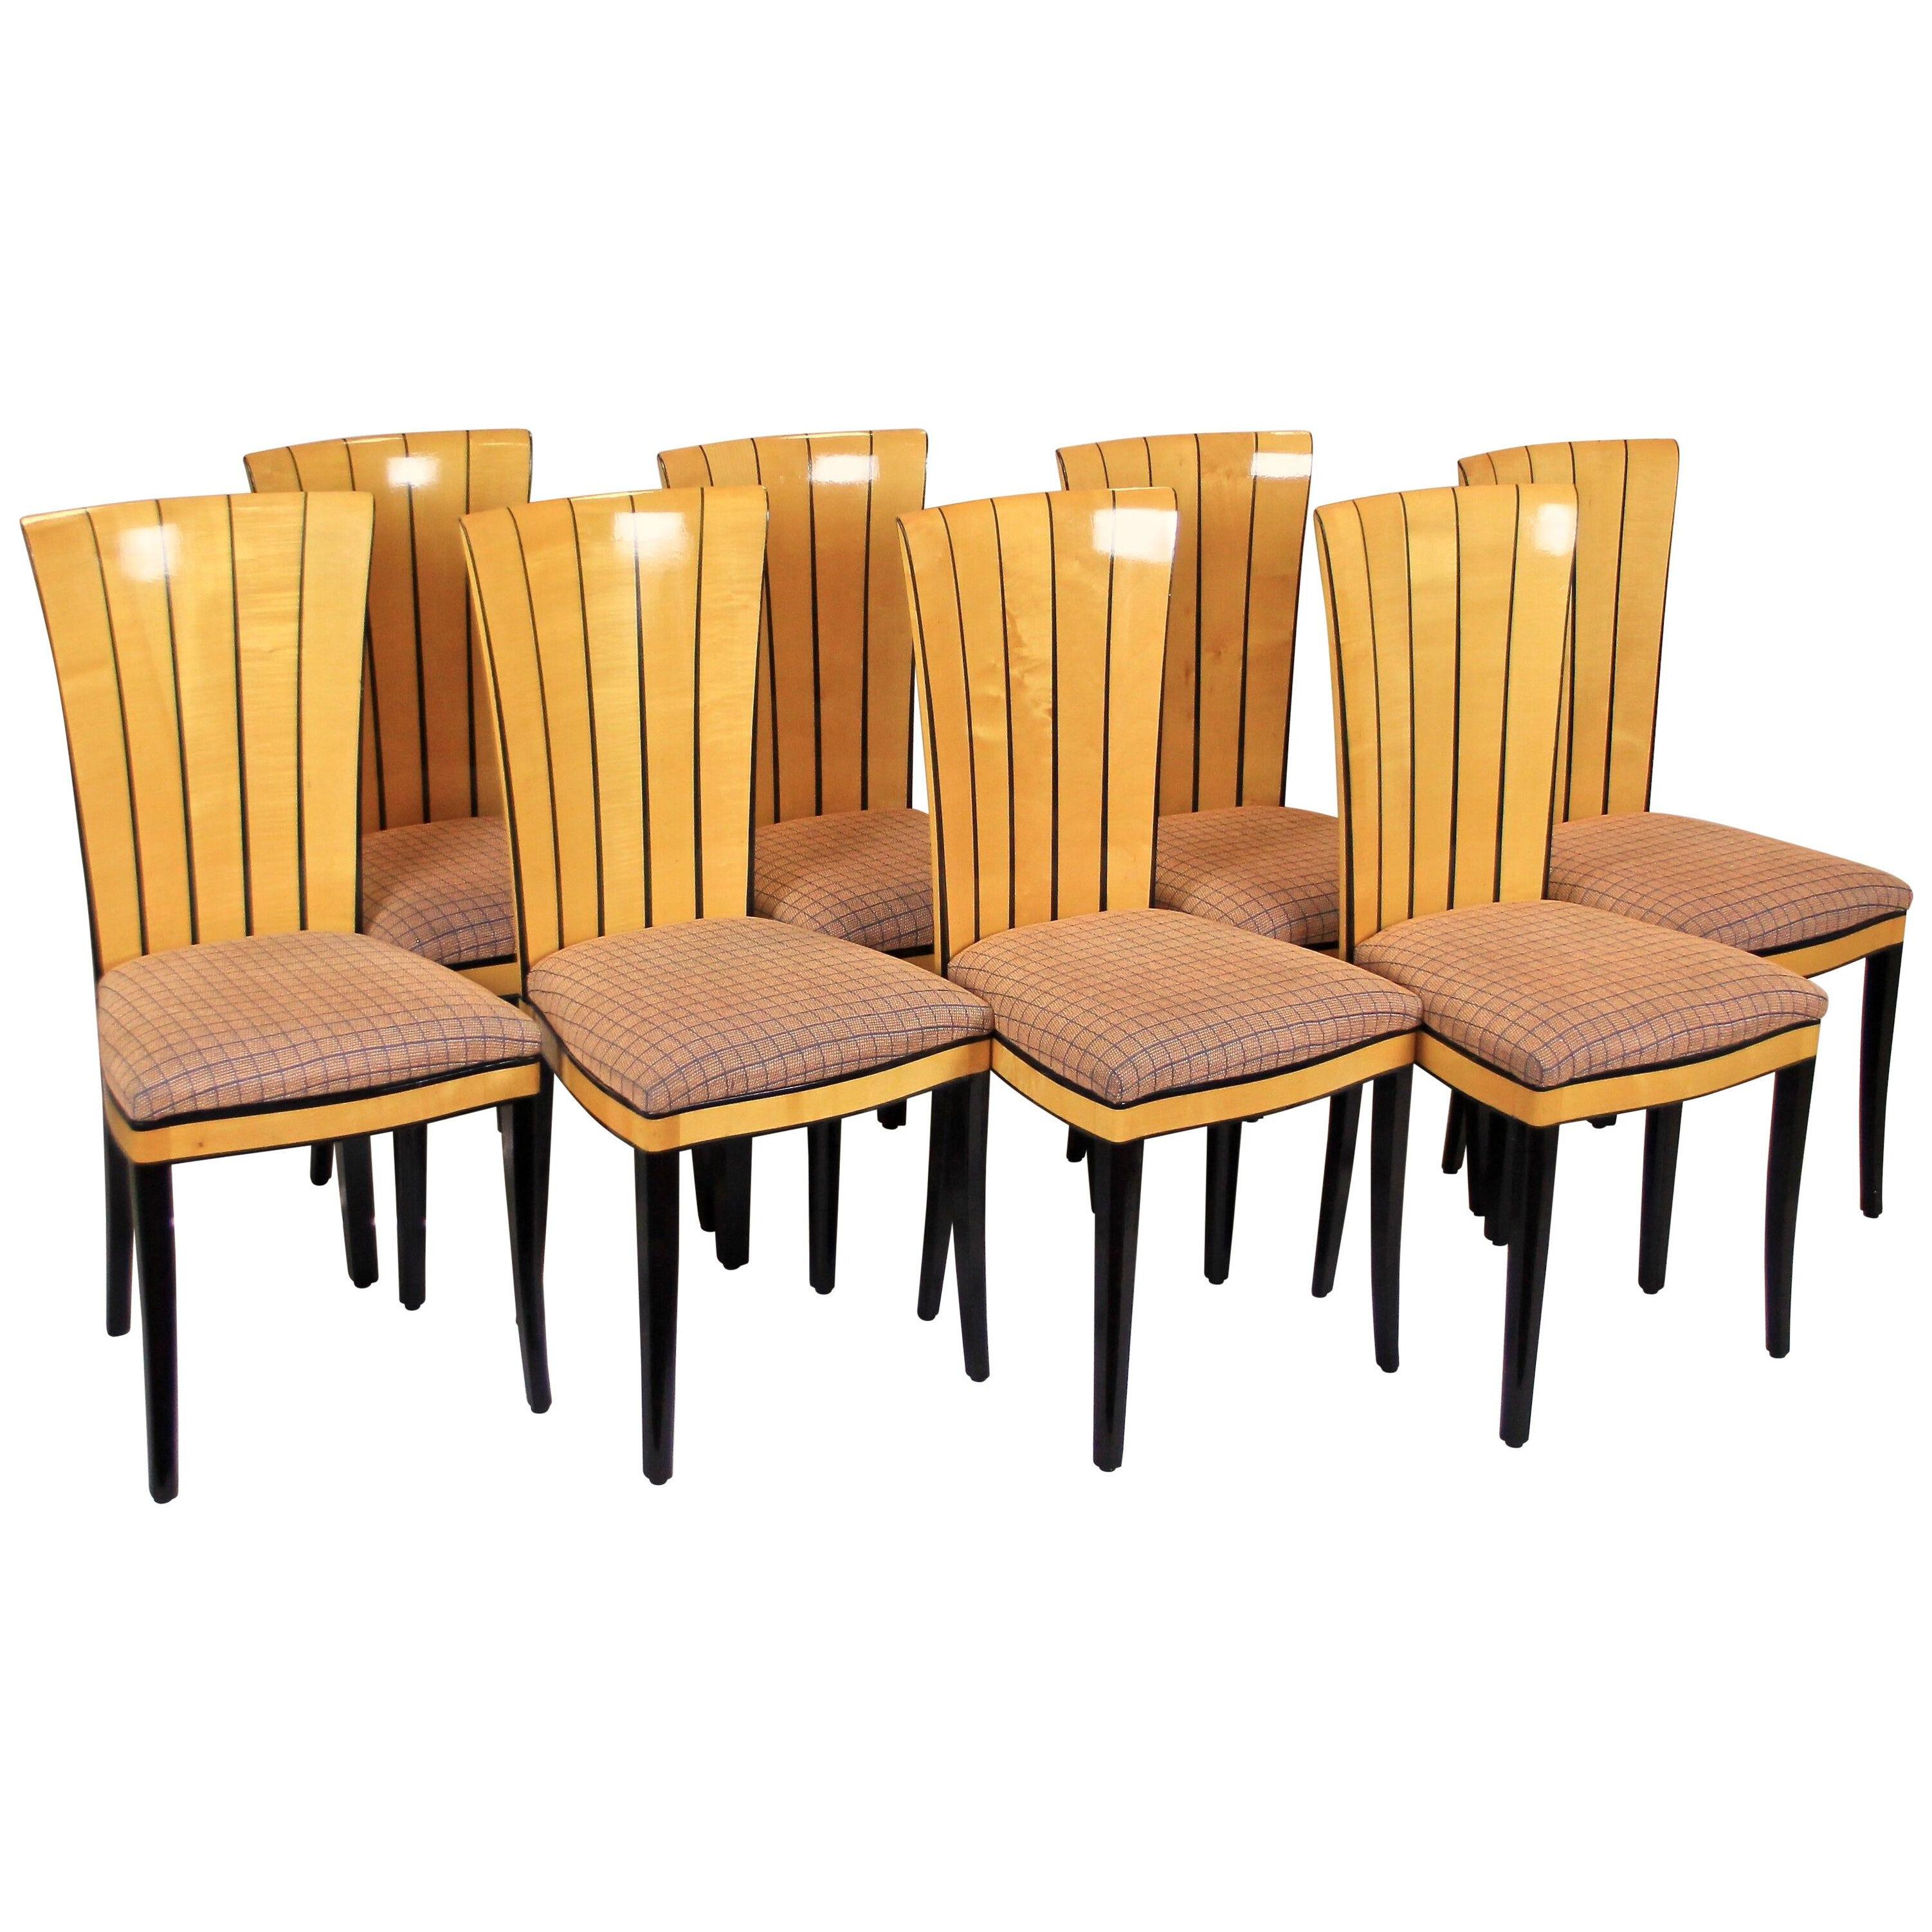 Set of Eight Dining Room Chairs Saarinen House by Adelta, Finland, circa 1983